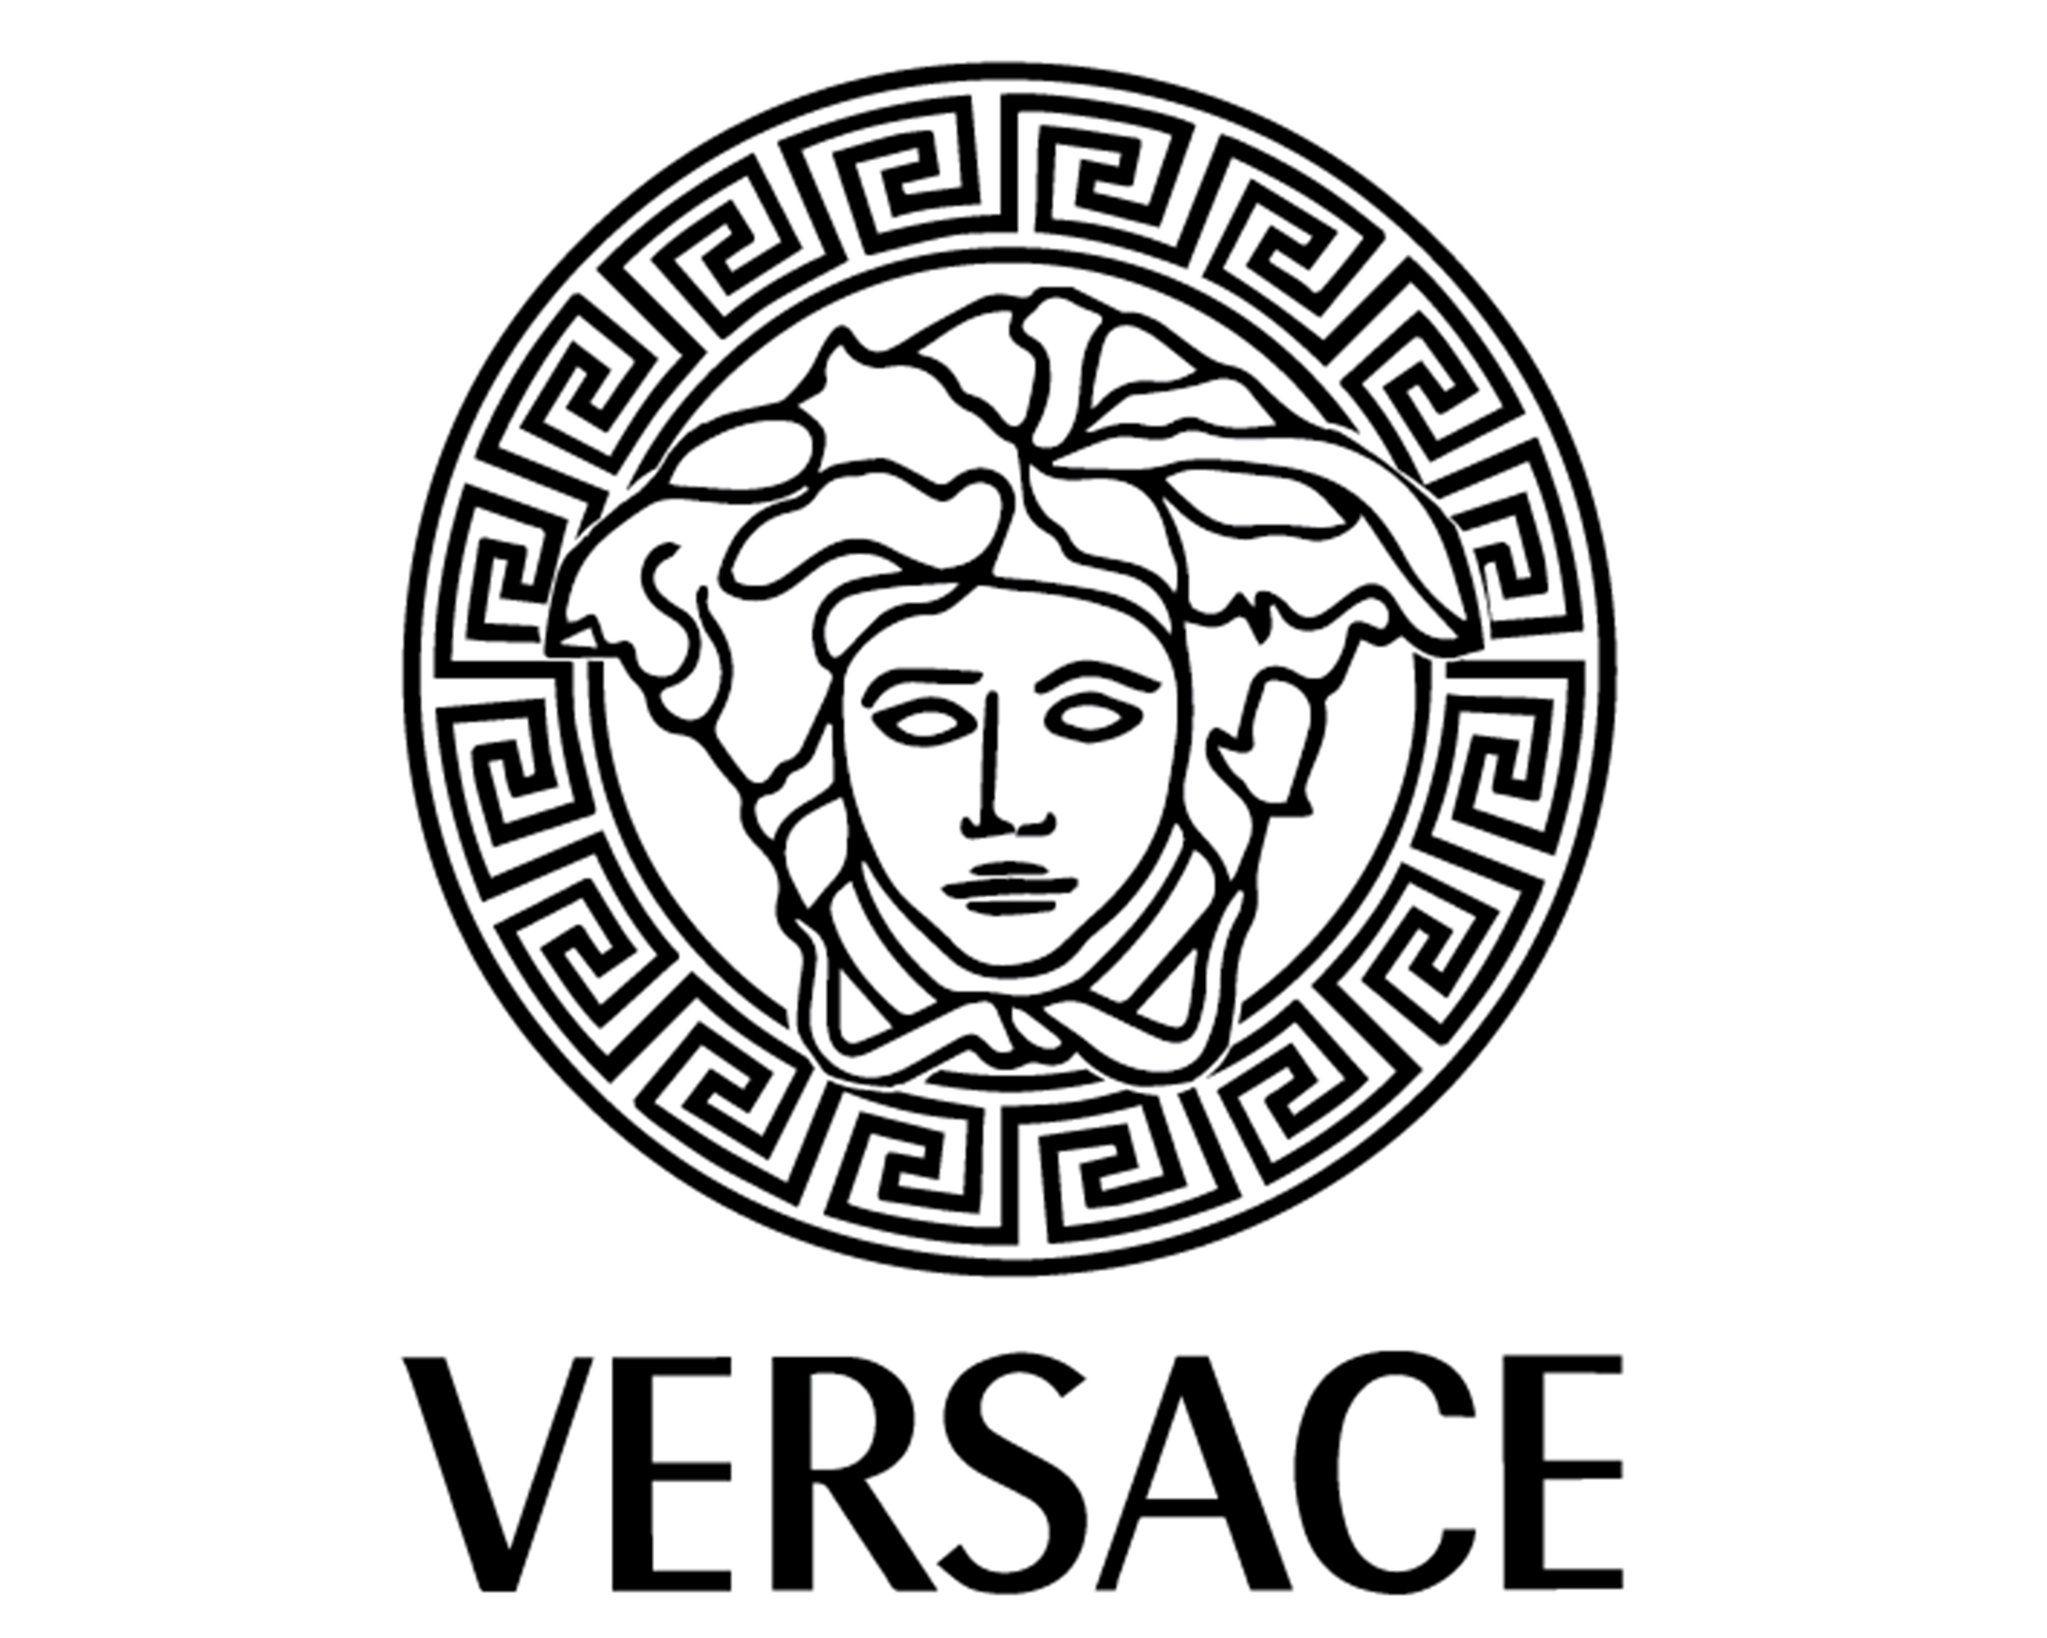 Versace logo painting stencil size pack *high quality. Boss bitch